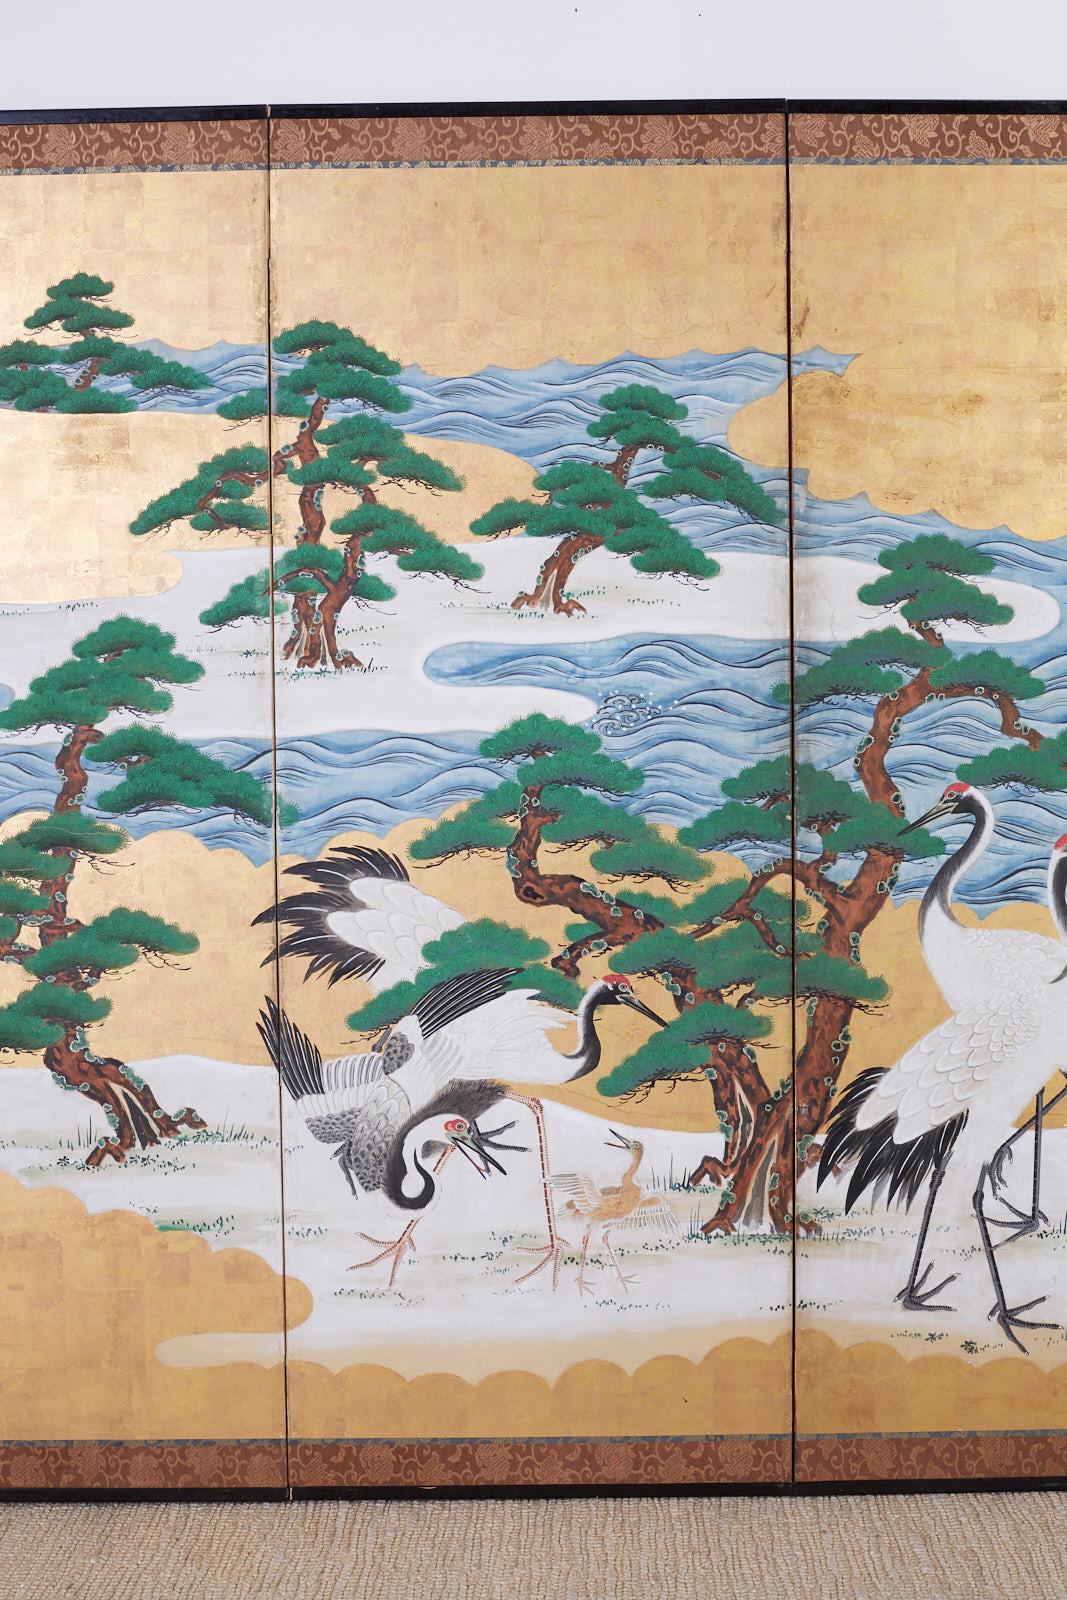 Etched Japanese Six Panel Screen Hamamatsu with Cranes by the Sea